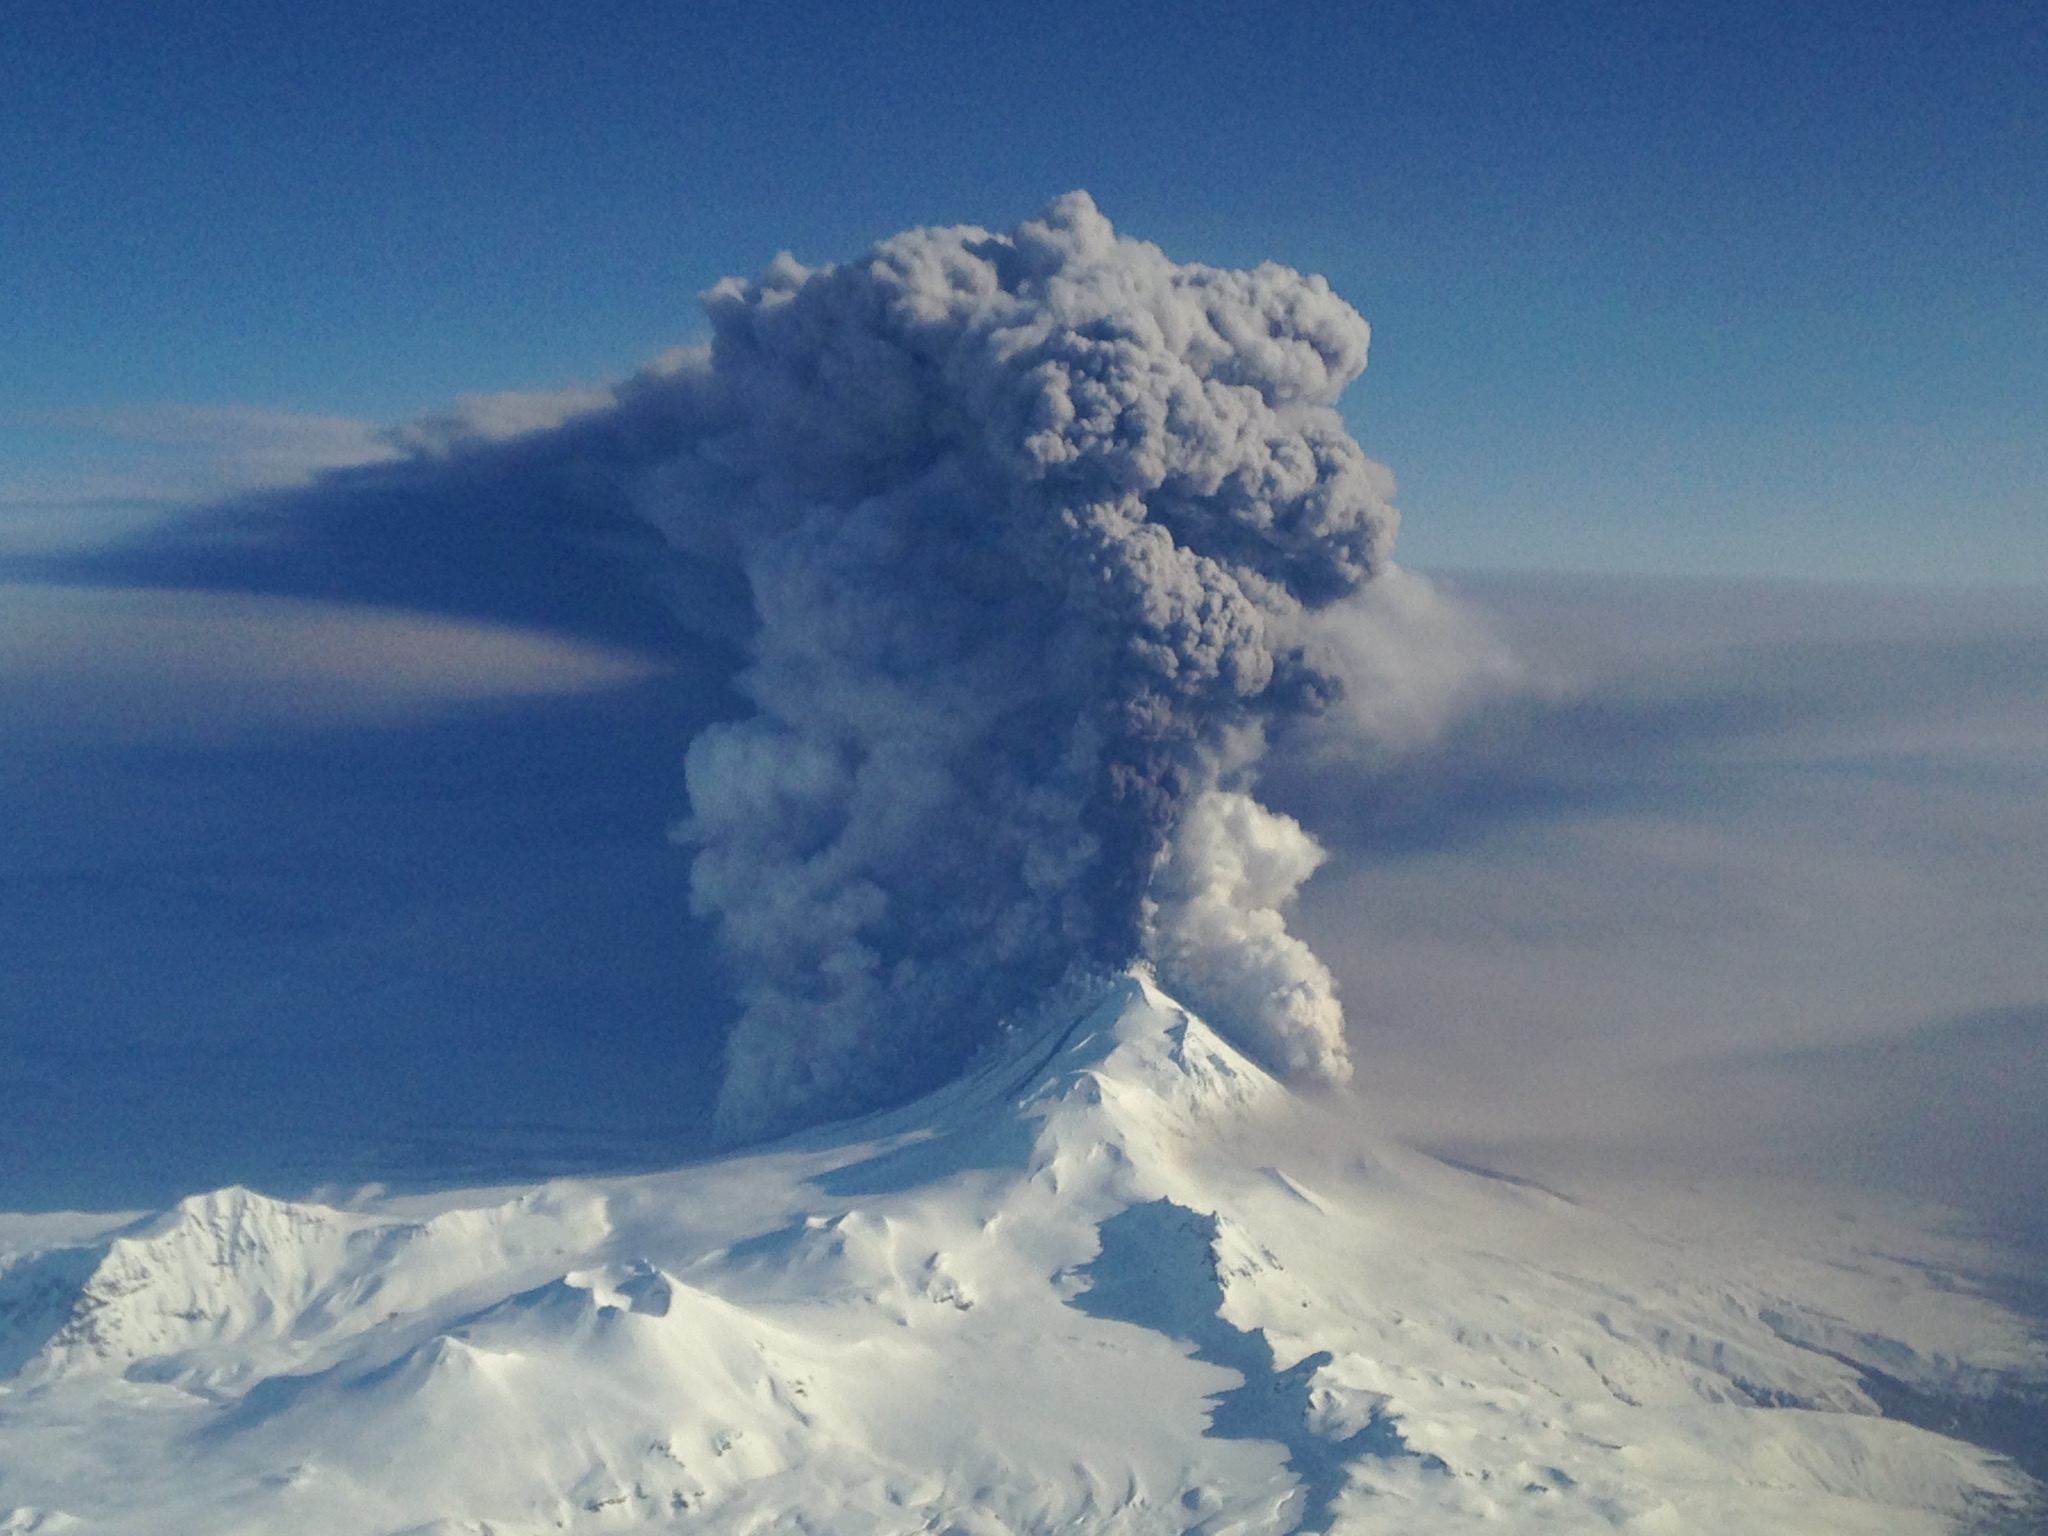 Photo by U.S. Coast Guard Lt. Cmdr. Nahshon Almandmoss Pavlof volcano erupts on March 28, 2016. The photo was taken looking northeast from a Coast Guard Hercules aircraft at 20,000 feet.